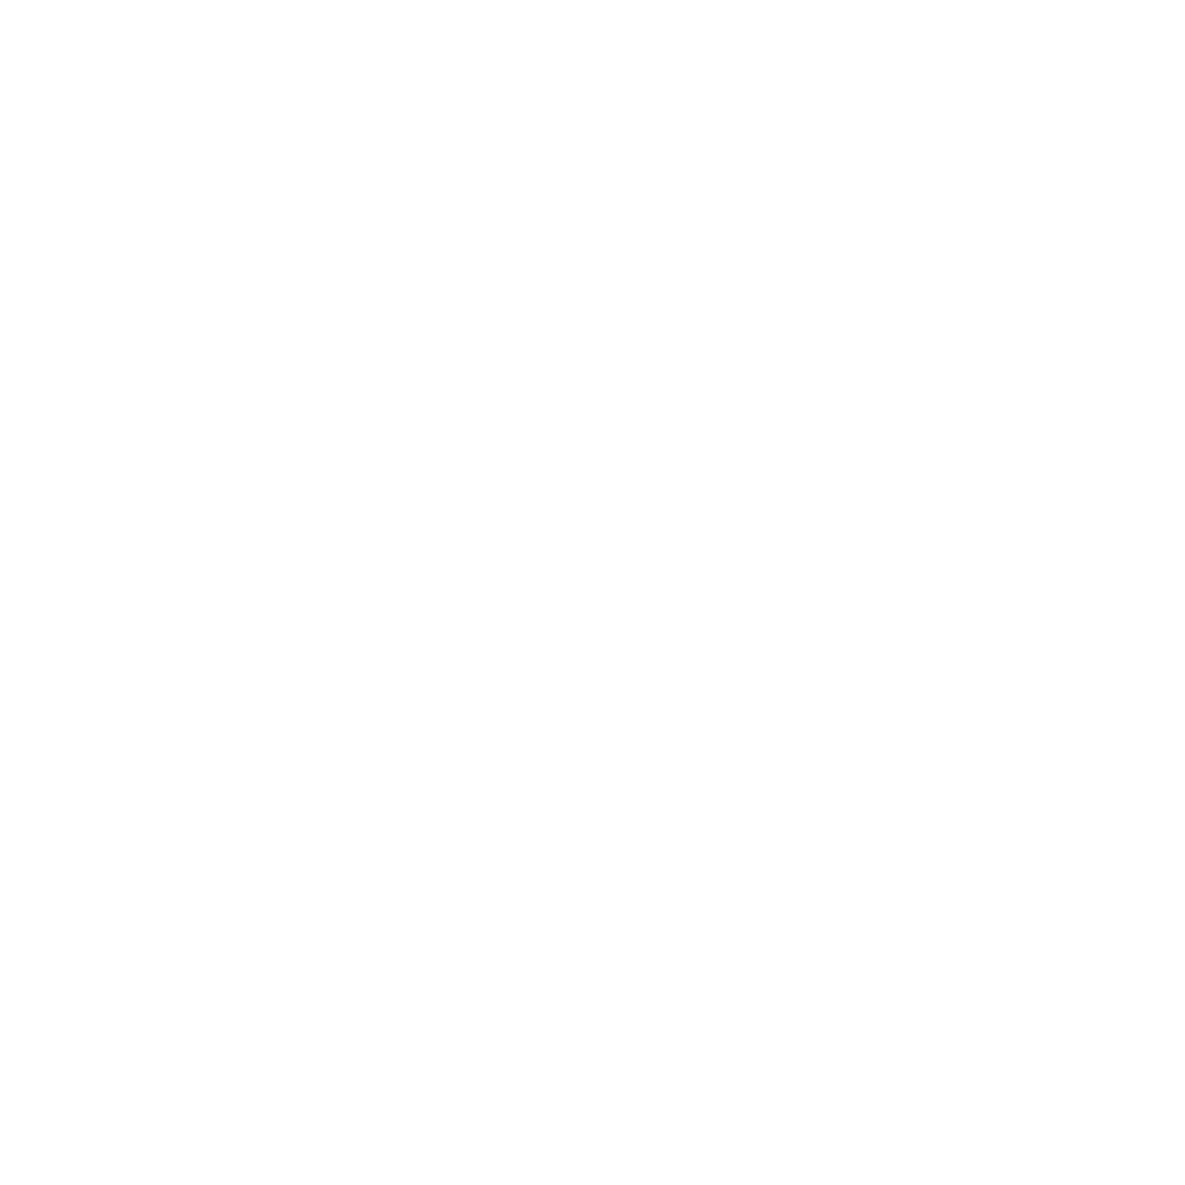 On-Chip network fabric for exceptional data throughout